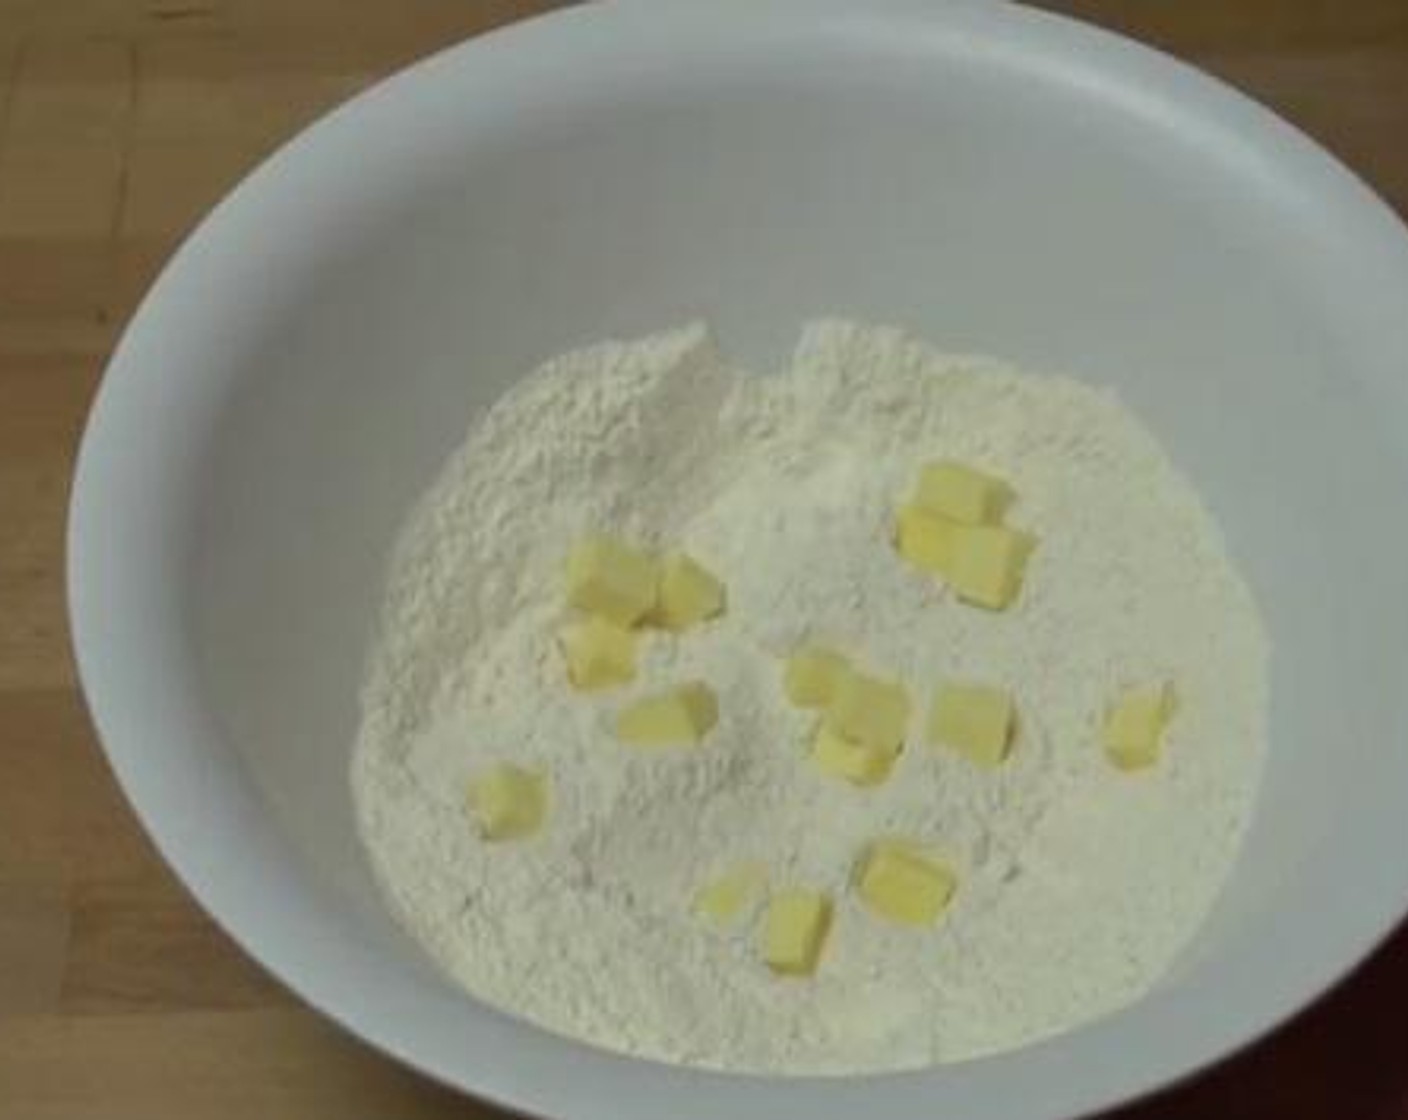 step 1 Inside a bowl, mix together the Self-Rising Flour (3 cups), Salt (1 tsp), McCormick® Garlic Powder (1/2 Tbsp), and Freshly Ground Black Pepper (to taste). Add the Butter (3 Tbsp) and rub together with the flour to combine.